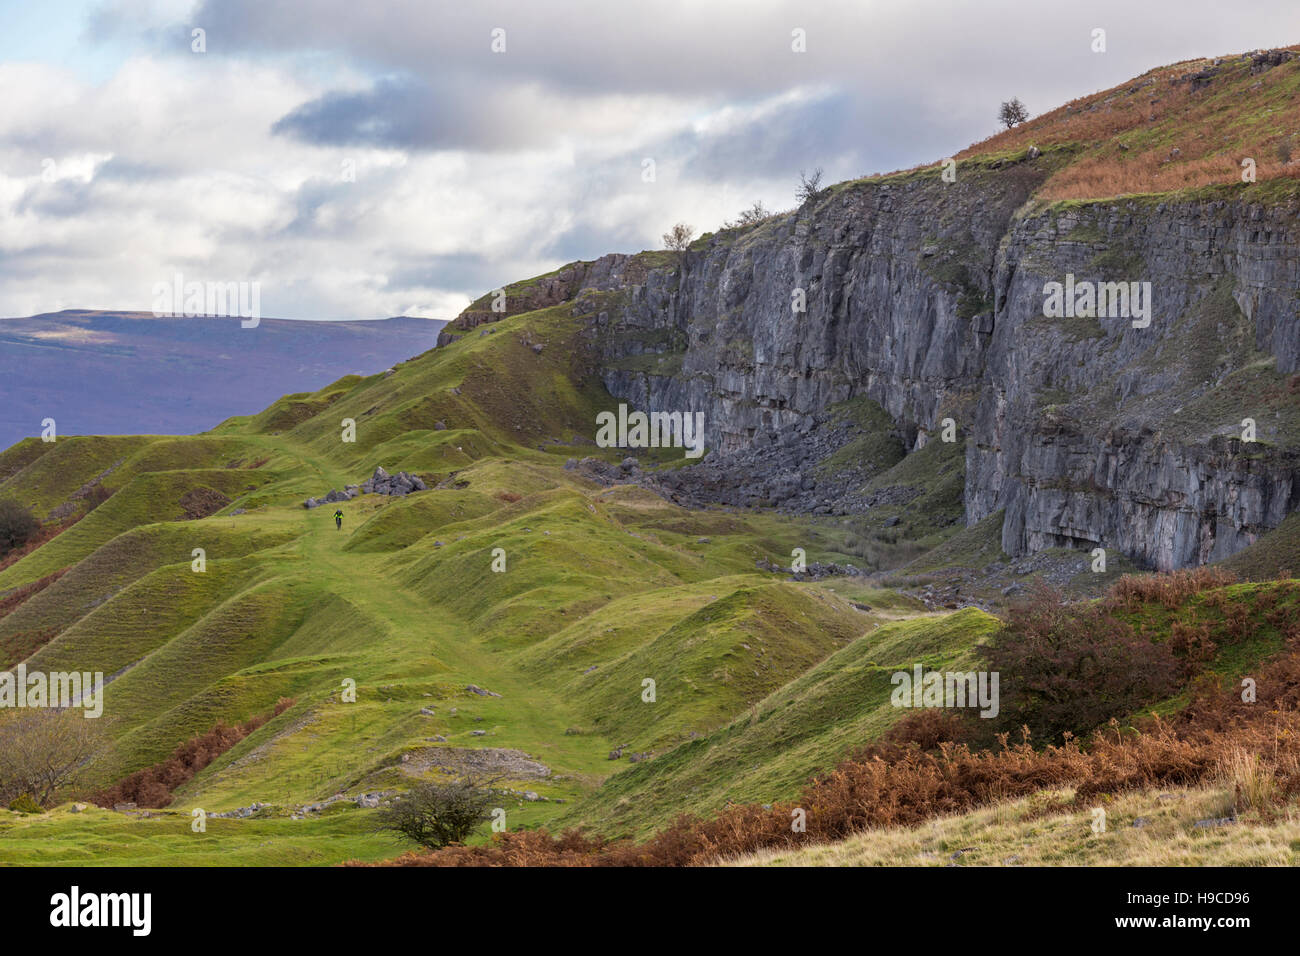 Llangatwg disused quarries and the distant Cafn Moel mountain near Llangattock, Brecon Beacons National Park, Wales, UK Stock Photo